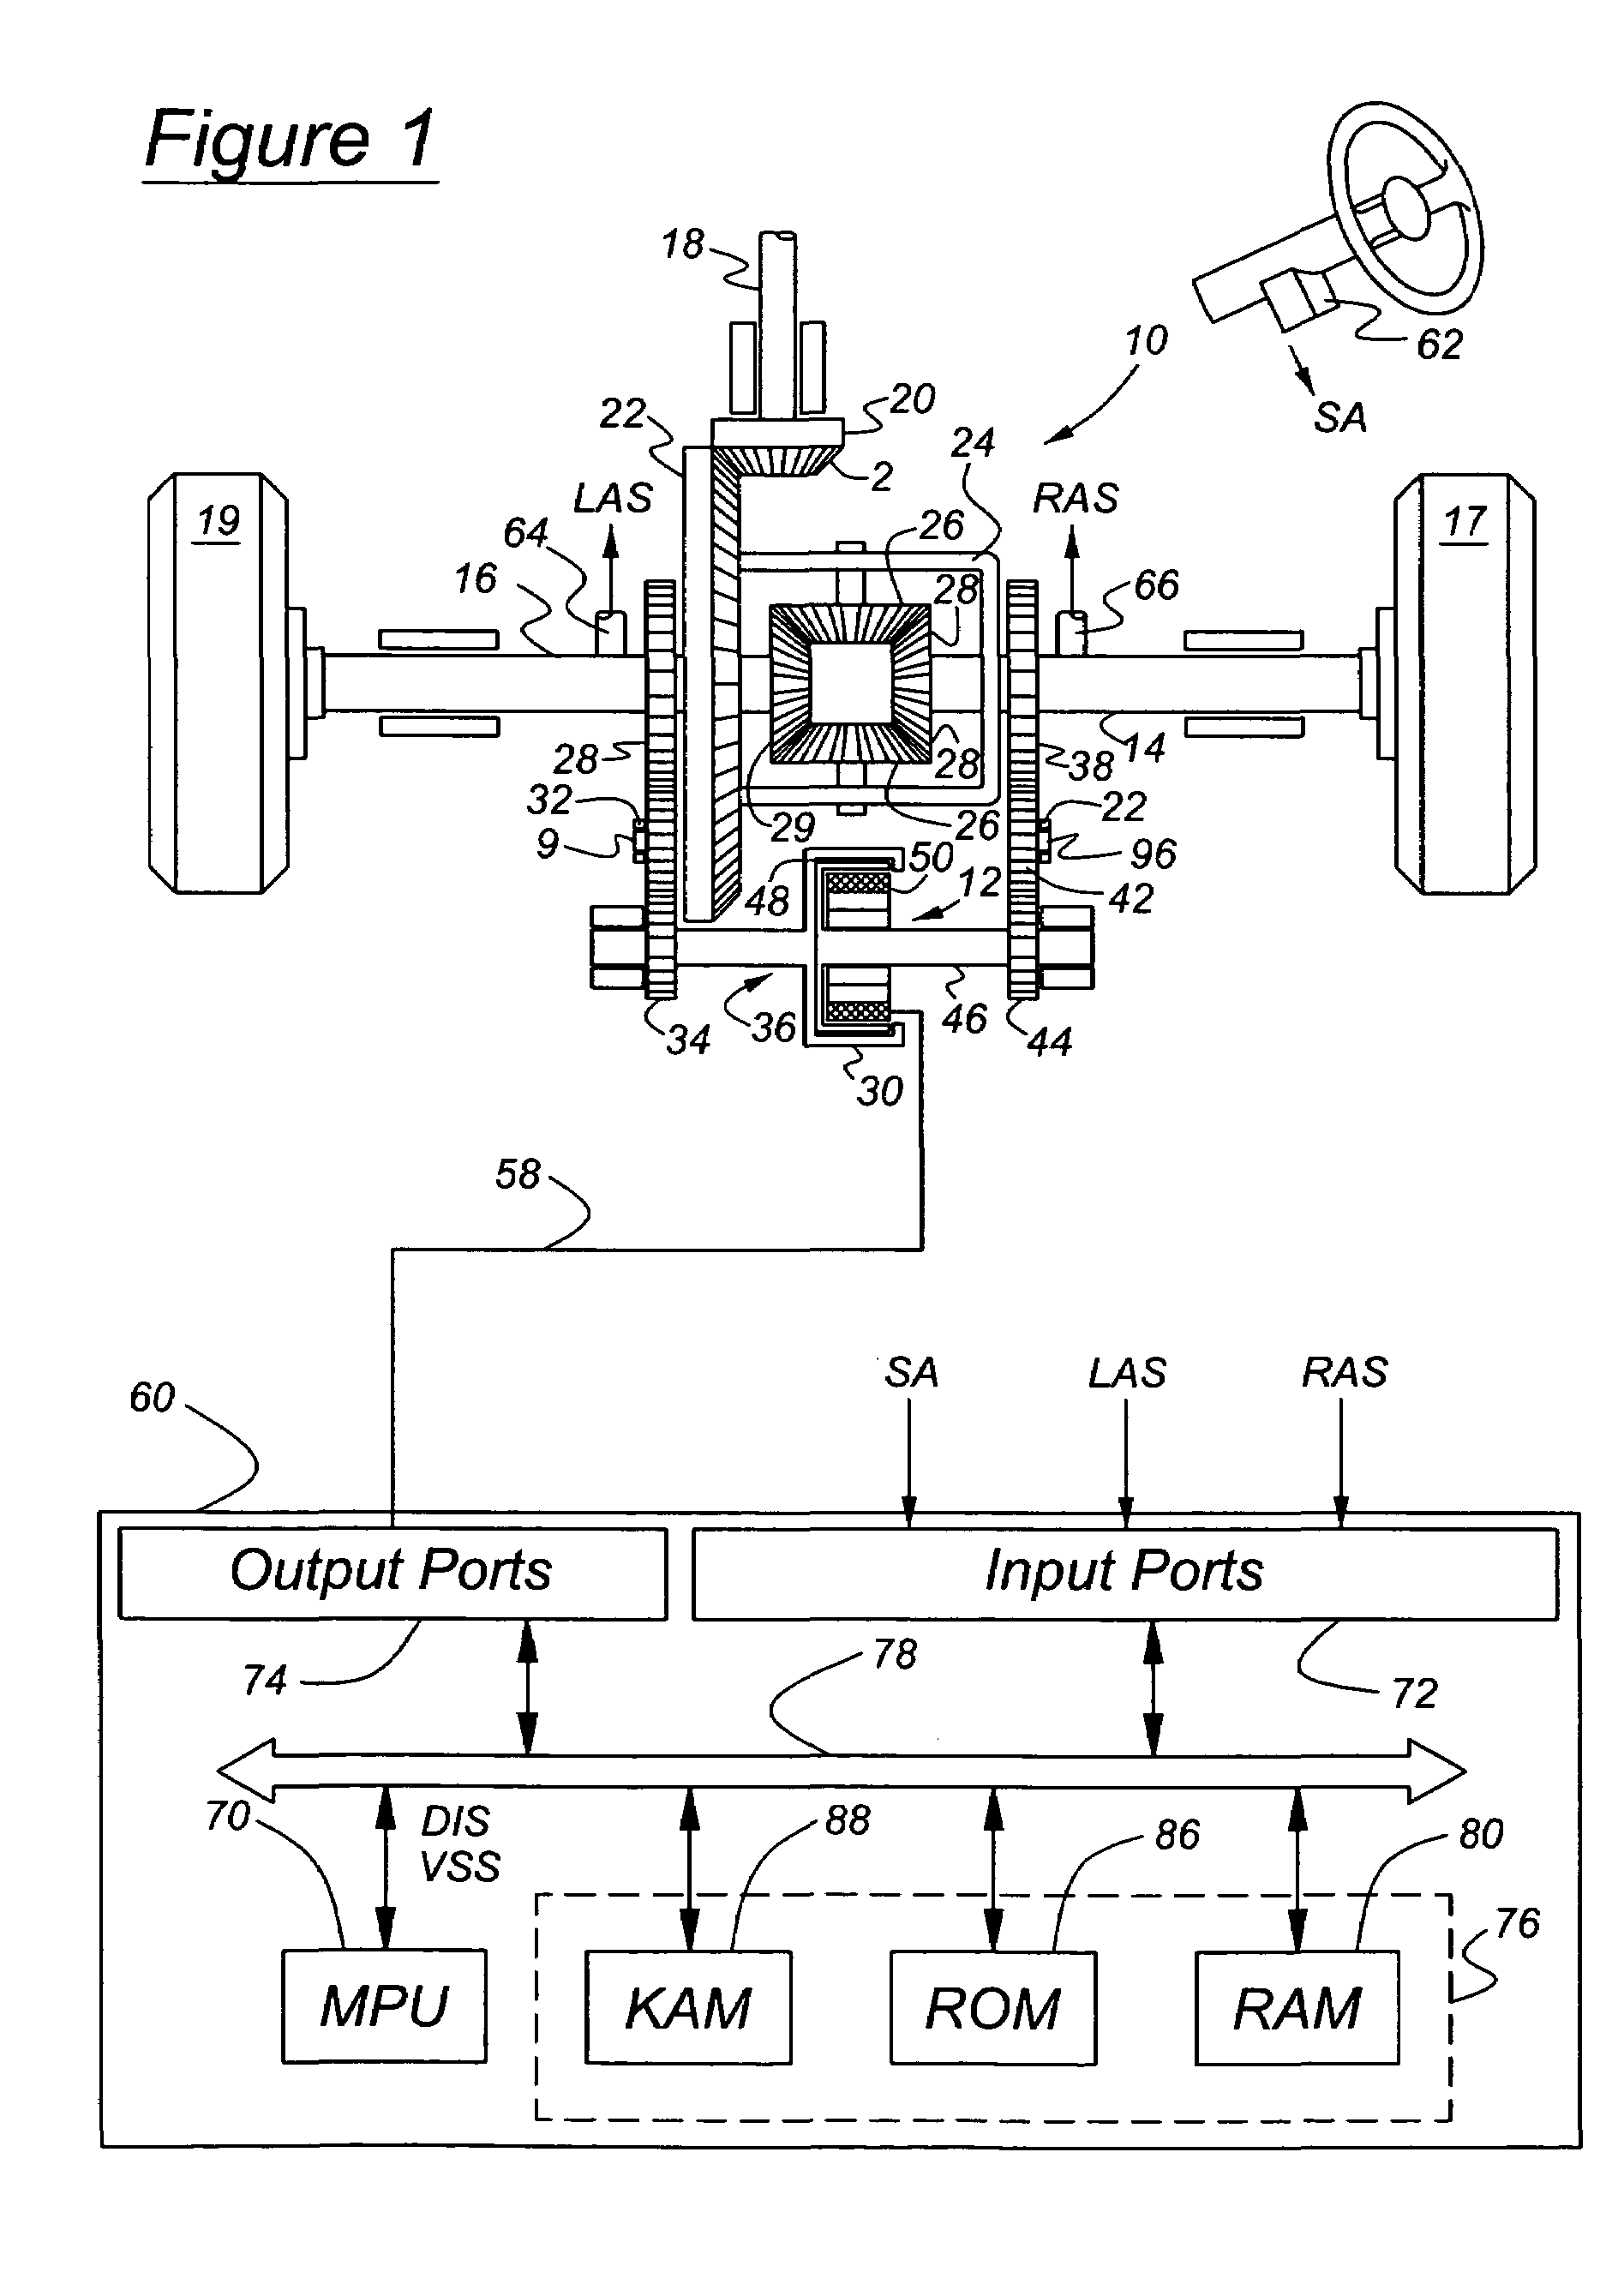 Magnetic powder torque transfer clutch for controlling slip across a differential mechanism